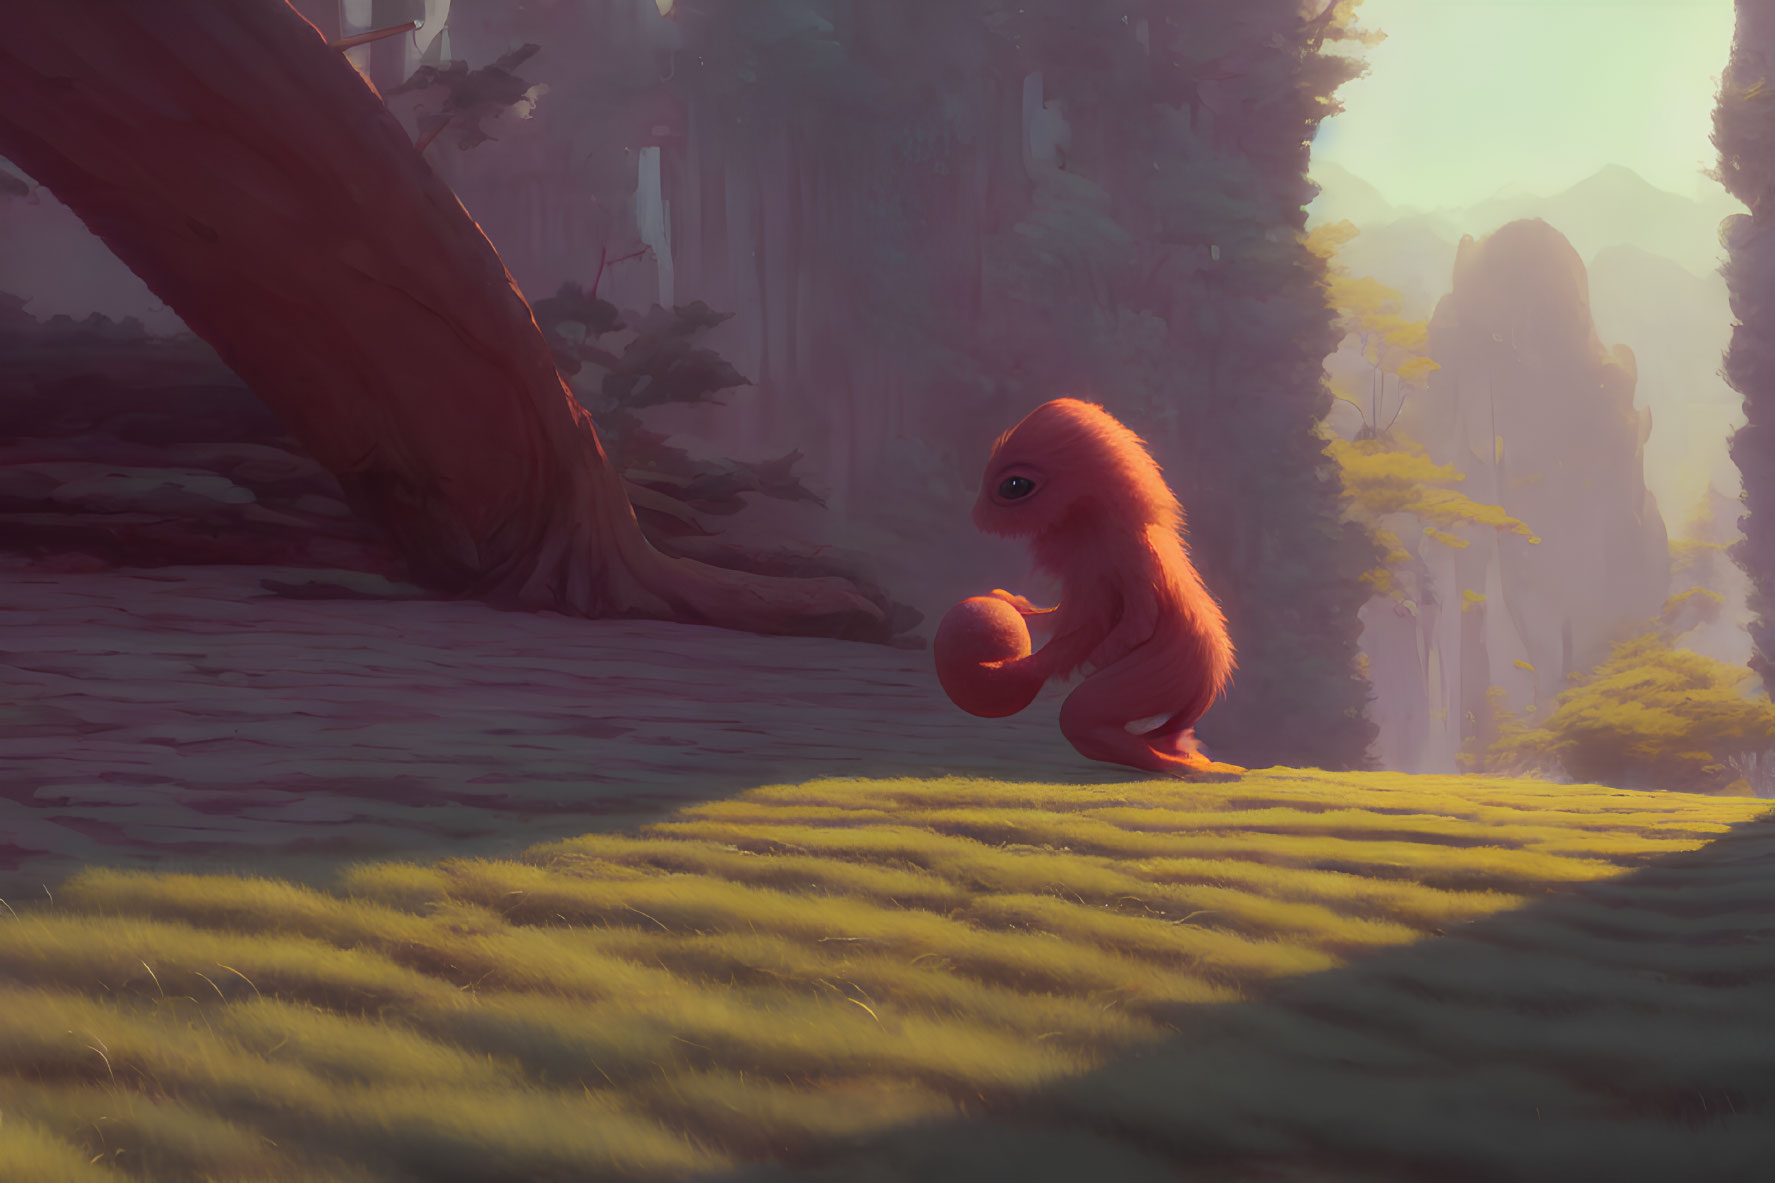 Red-furred whimsical creature holding a sphere in sunny forest scene